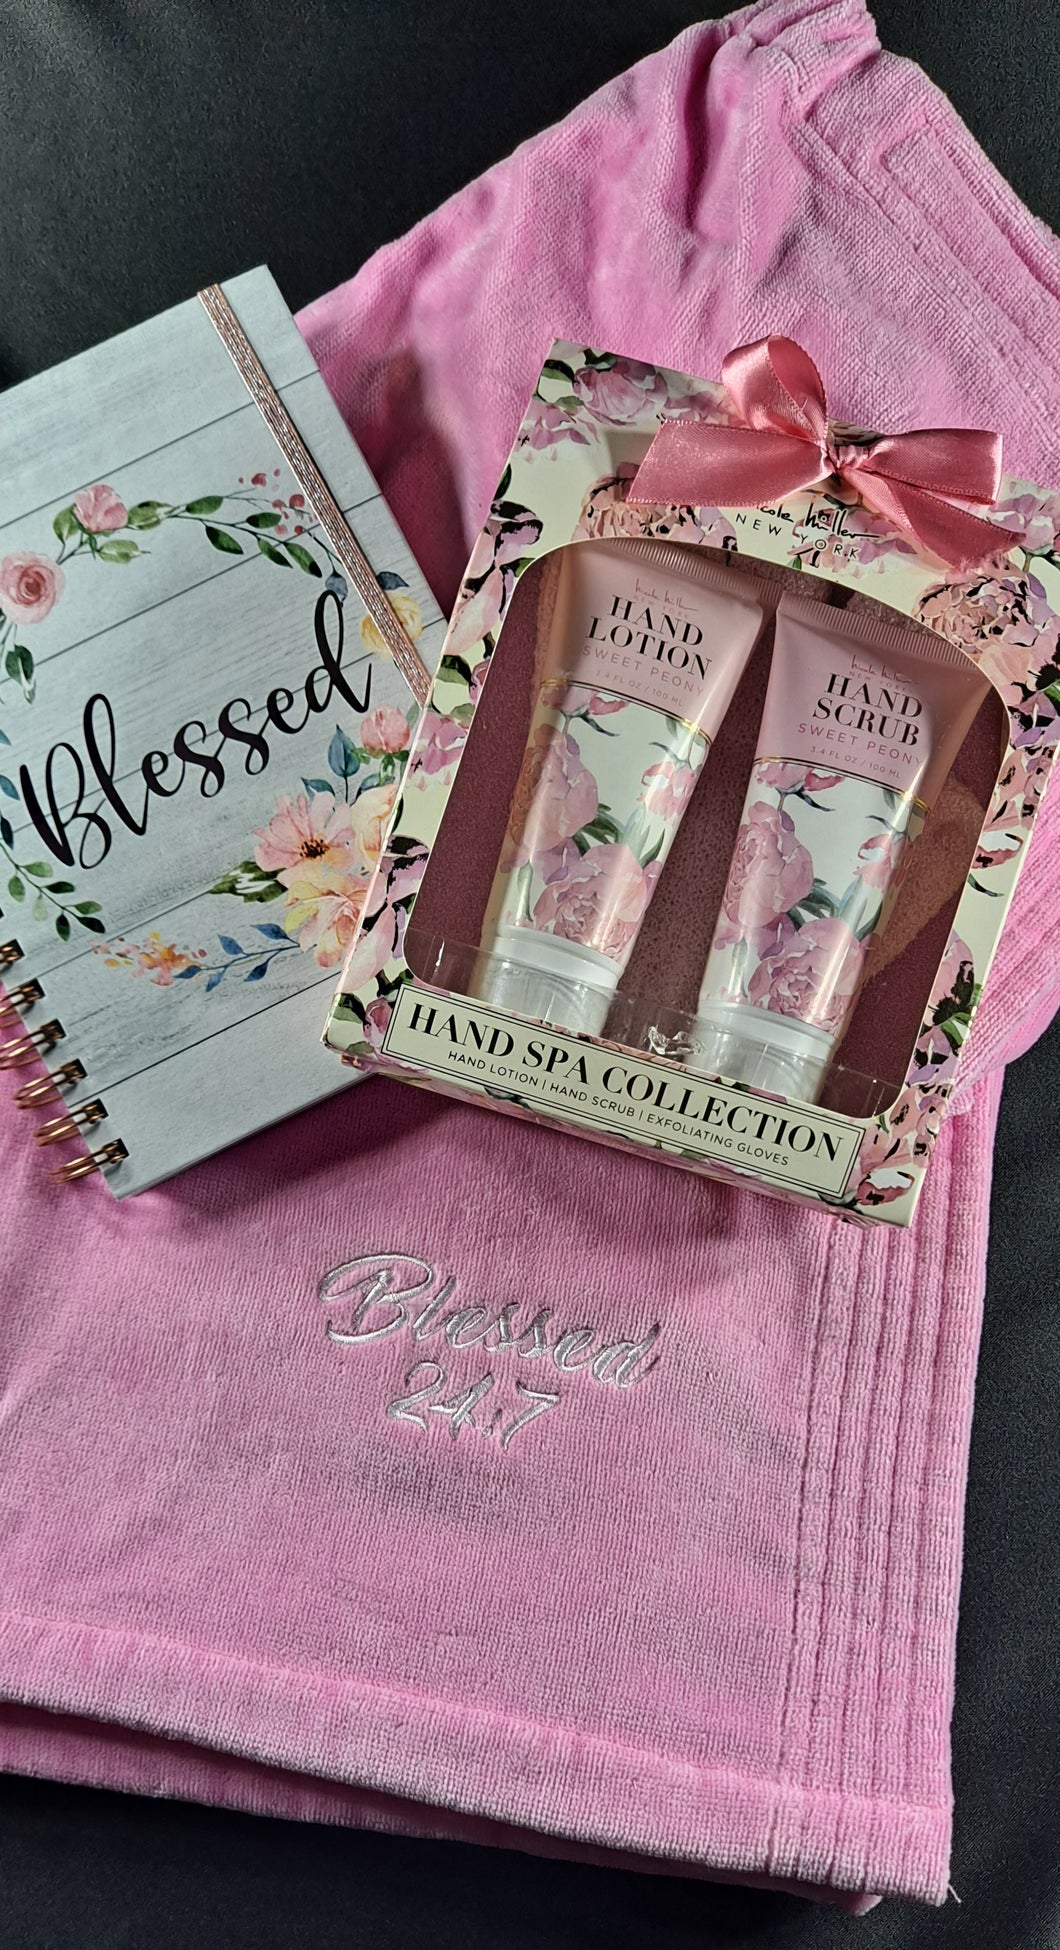 Blessed 24:7 Ladies Self Care Spa Wrap (Light Pink) Gift Set plus more... FREE SHIPPING